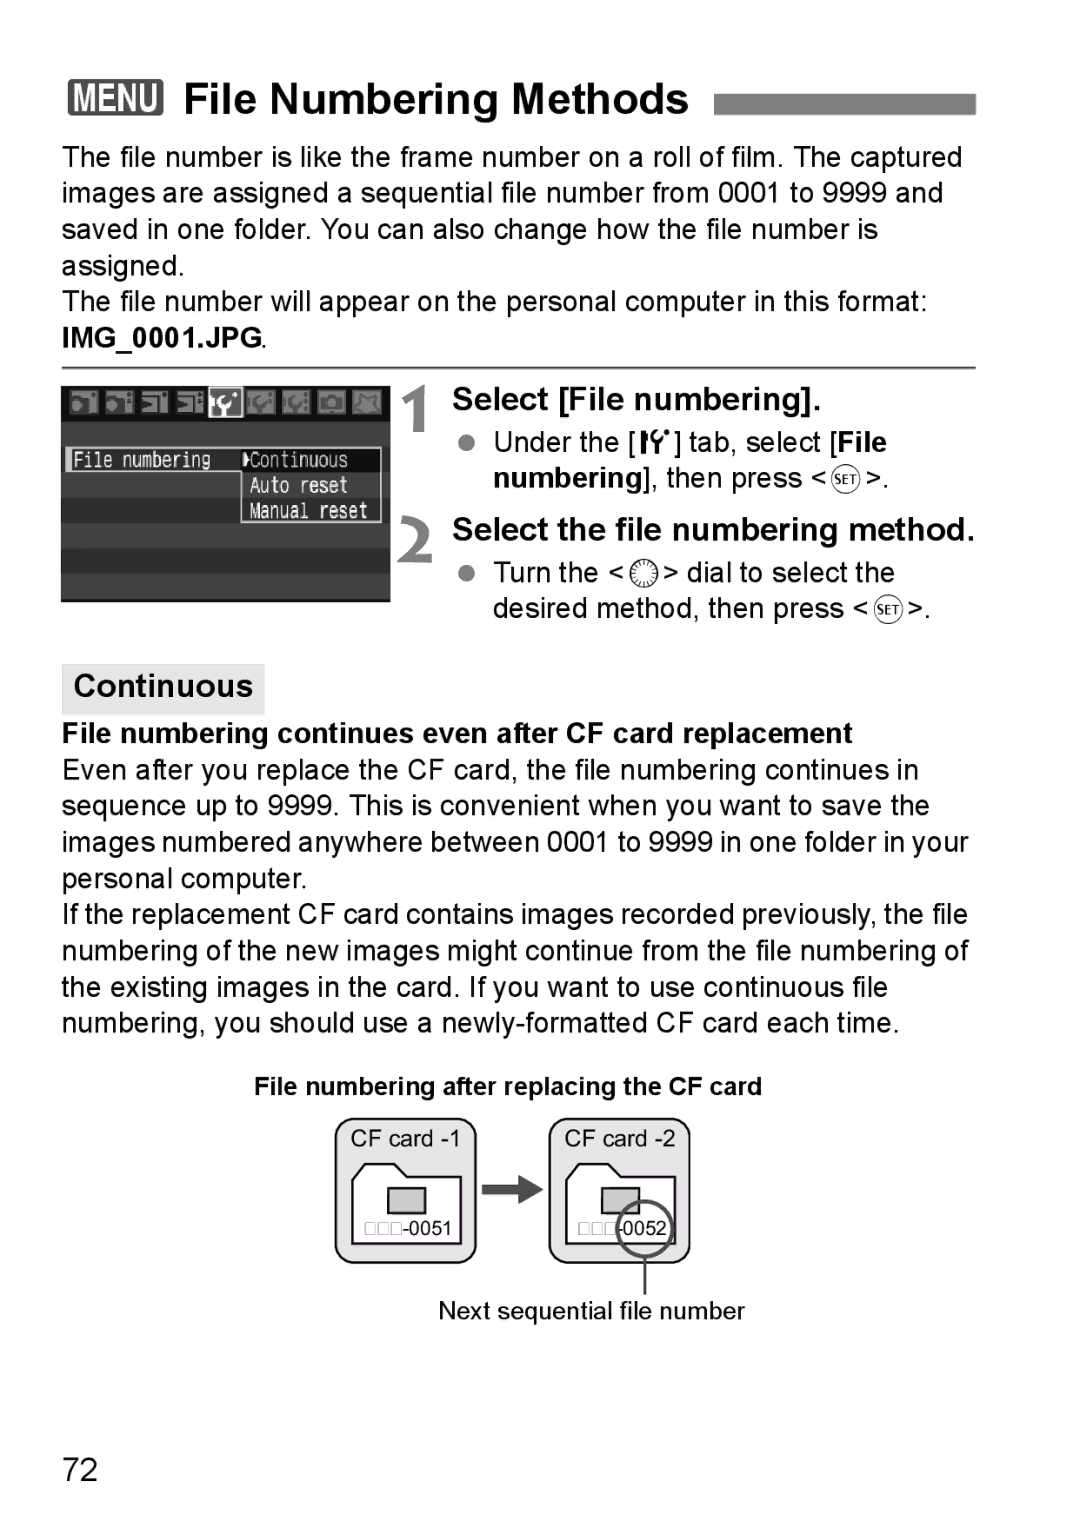 Canon EOS40D instruction manual 3File Numbering Methods, Continuous, File numbering after replacing the CF card 